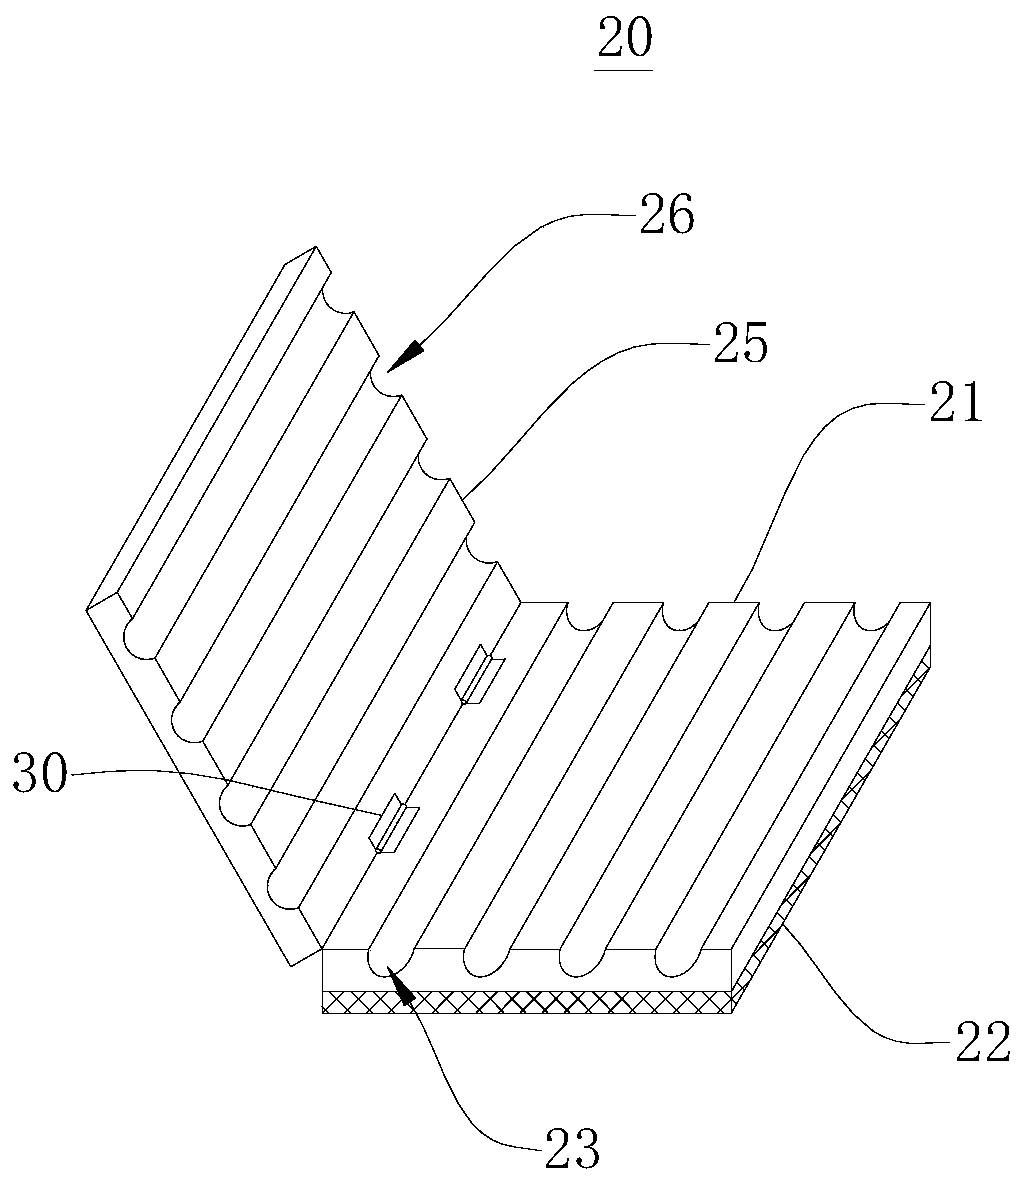 Intraoperative energy instrument placement device